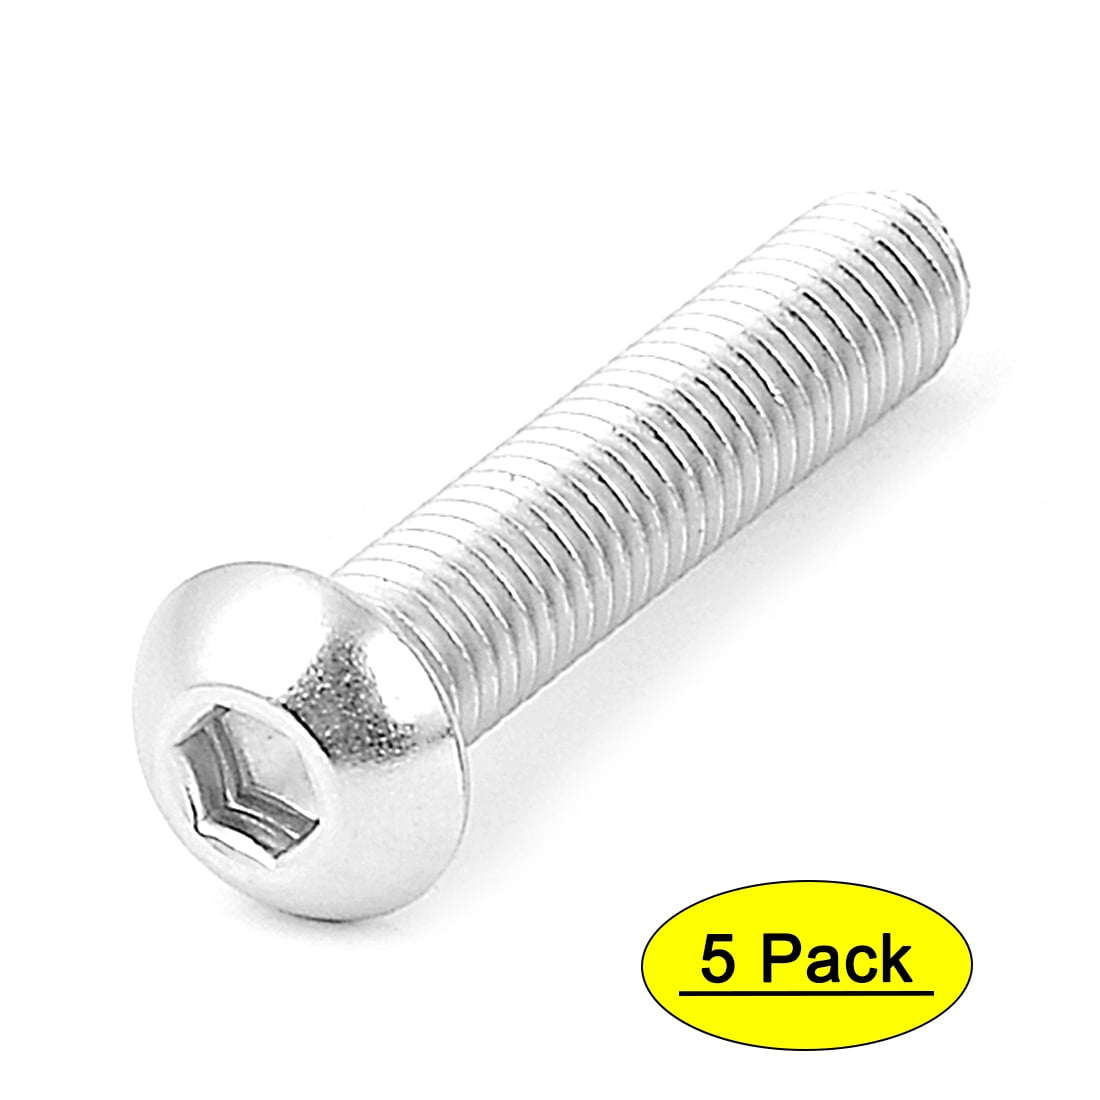 M8 X 50 Socket Button Allen Screw Flanged ISO 7380-5PK Stainless 